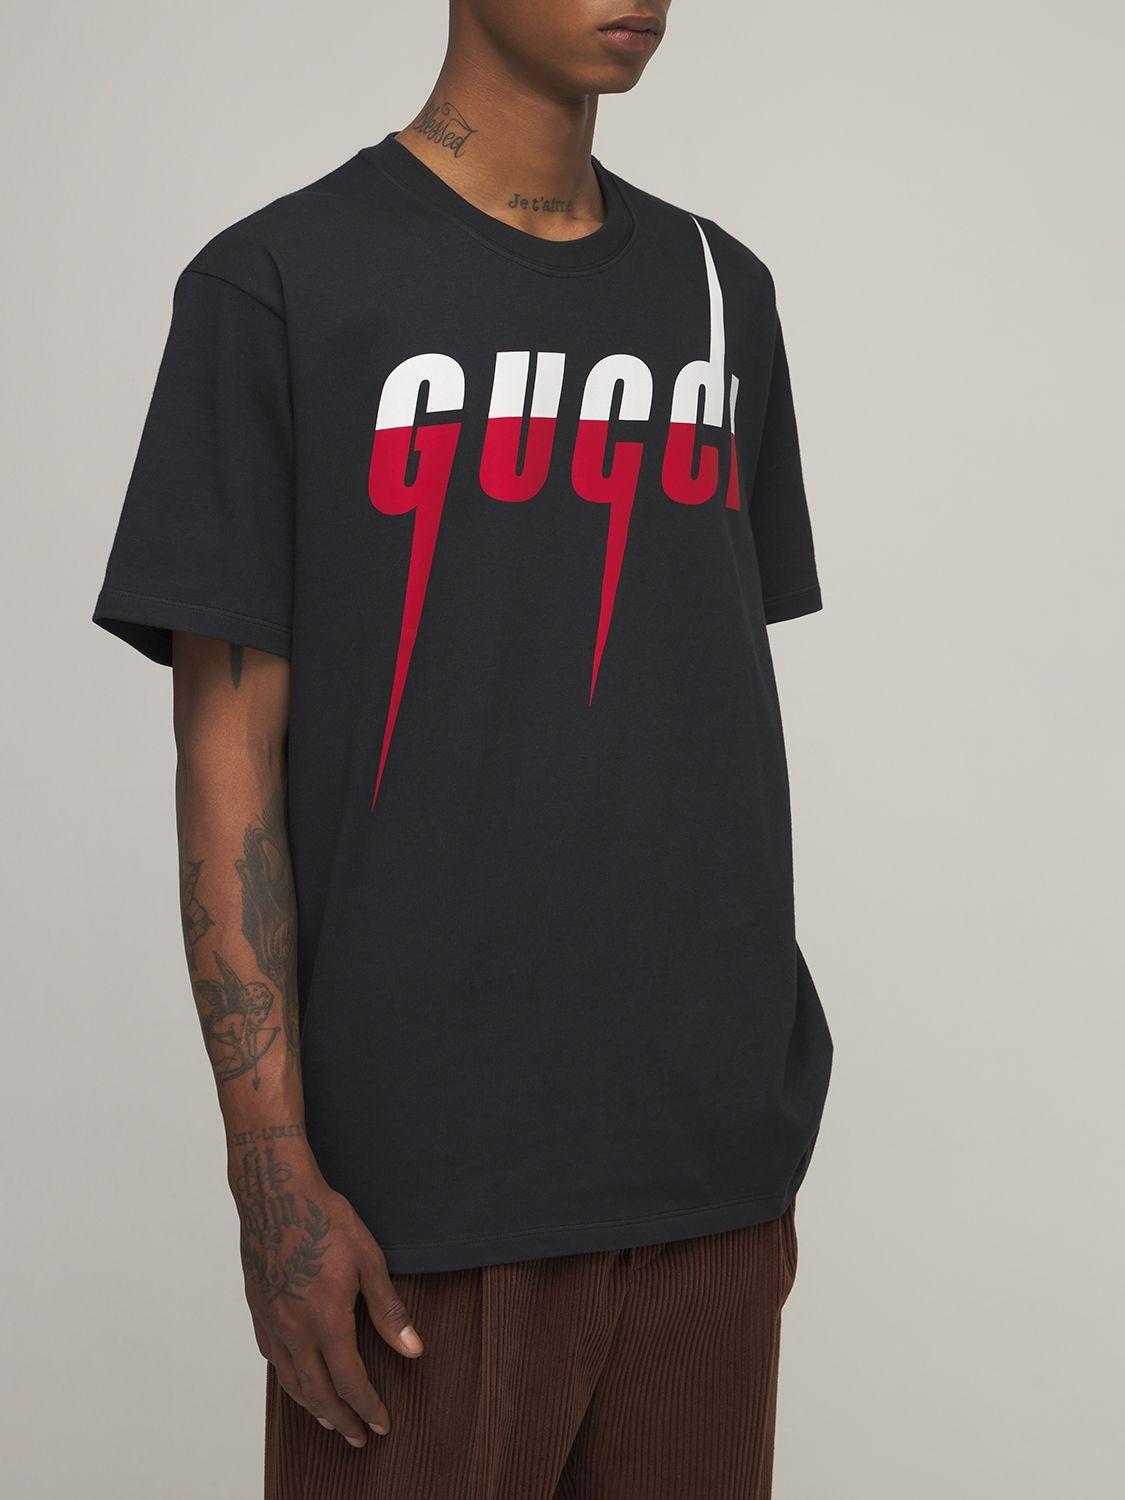 Gucci Cotton T-shirt With Blade Print in Black for Men - Save 47% | Lyst